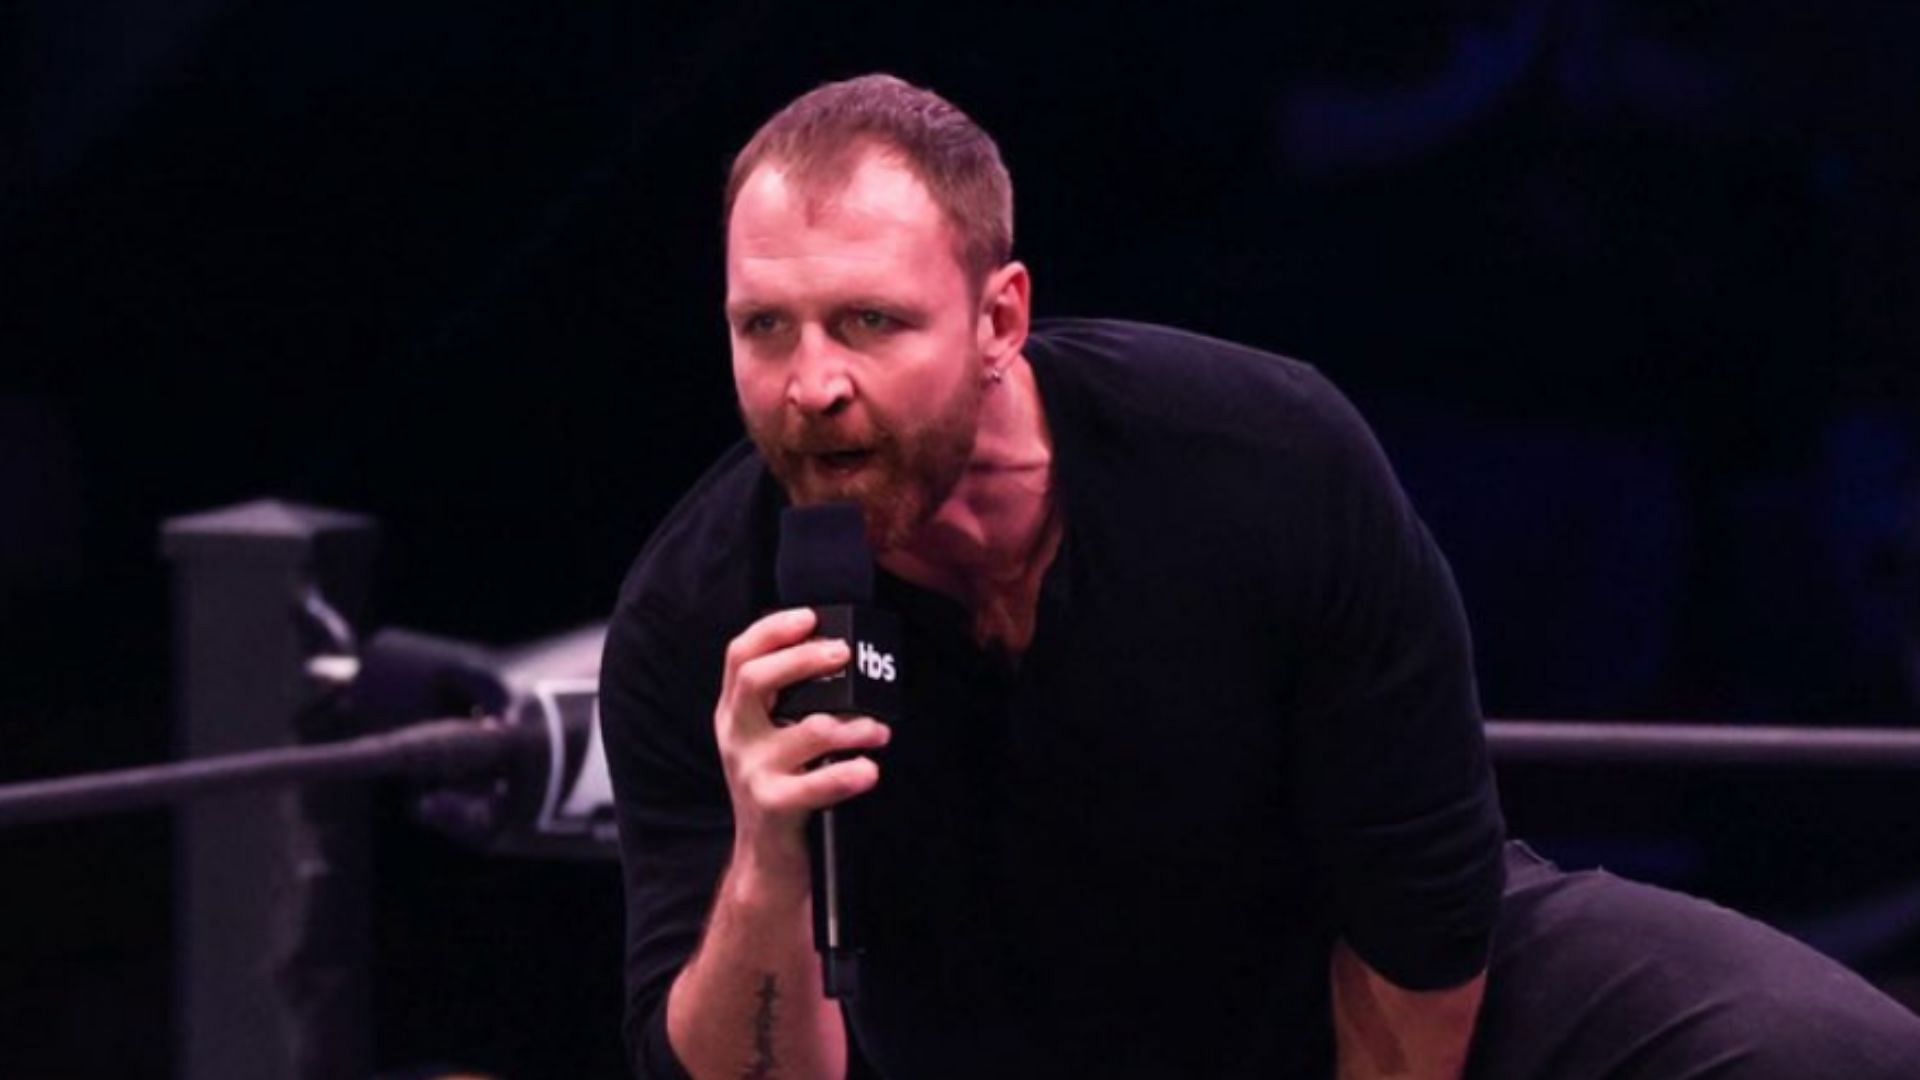 The reason why Jon Moxley was pulled from a recent show has now been revealed